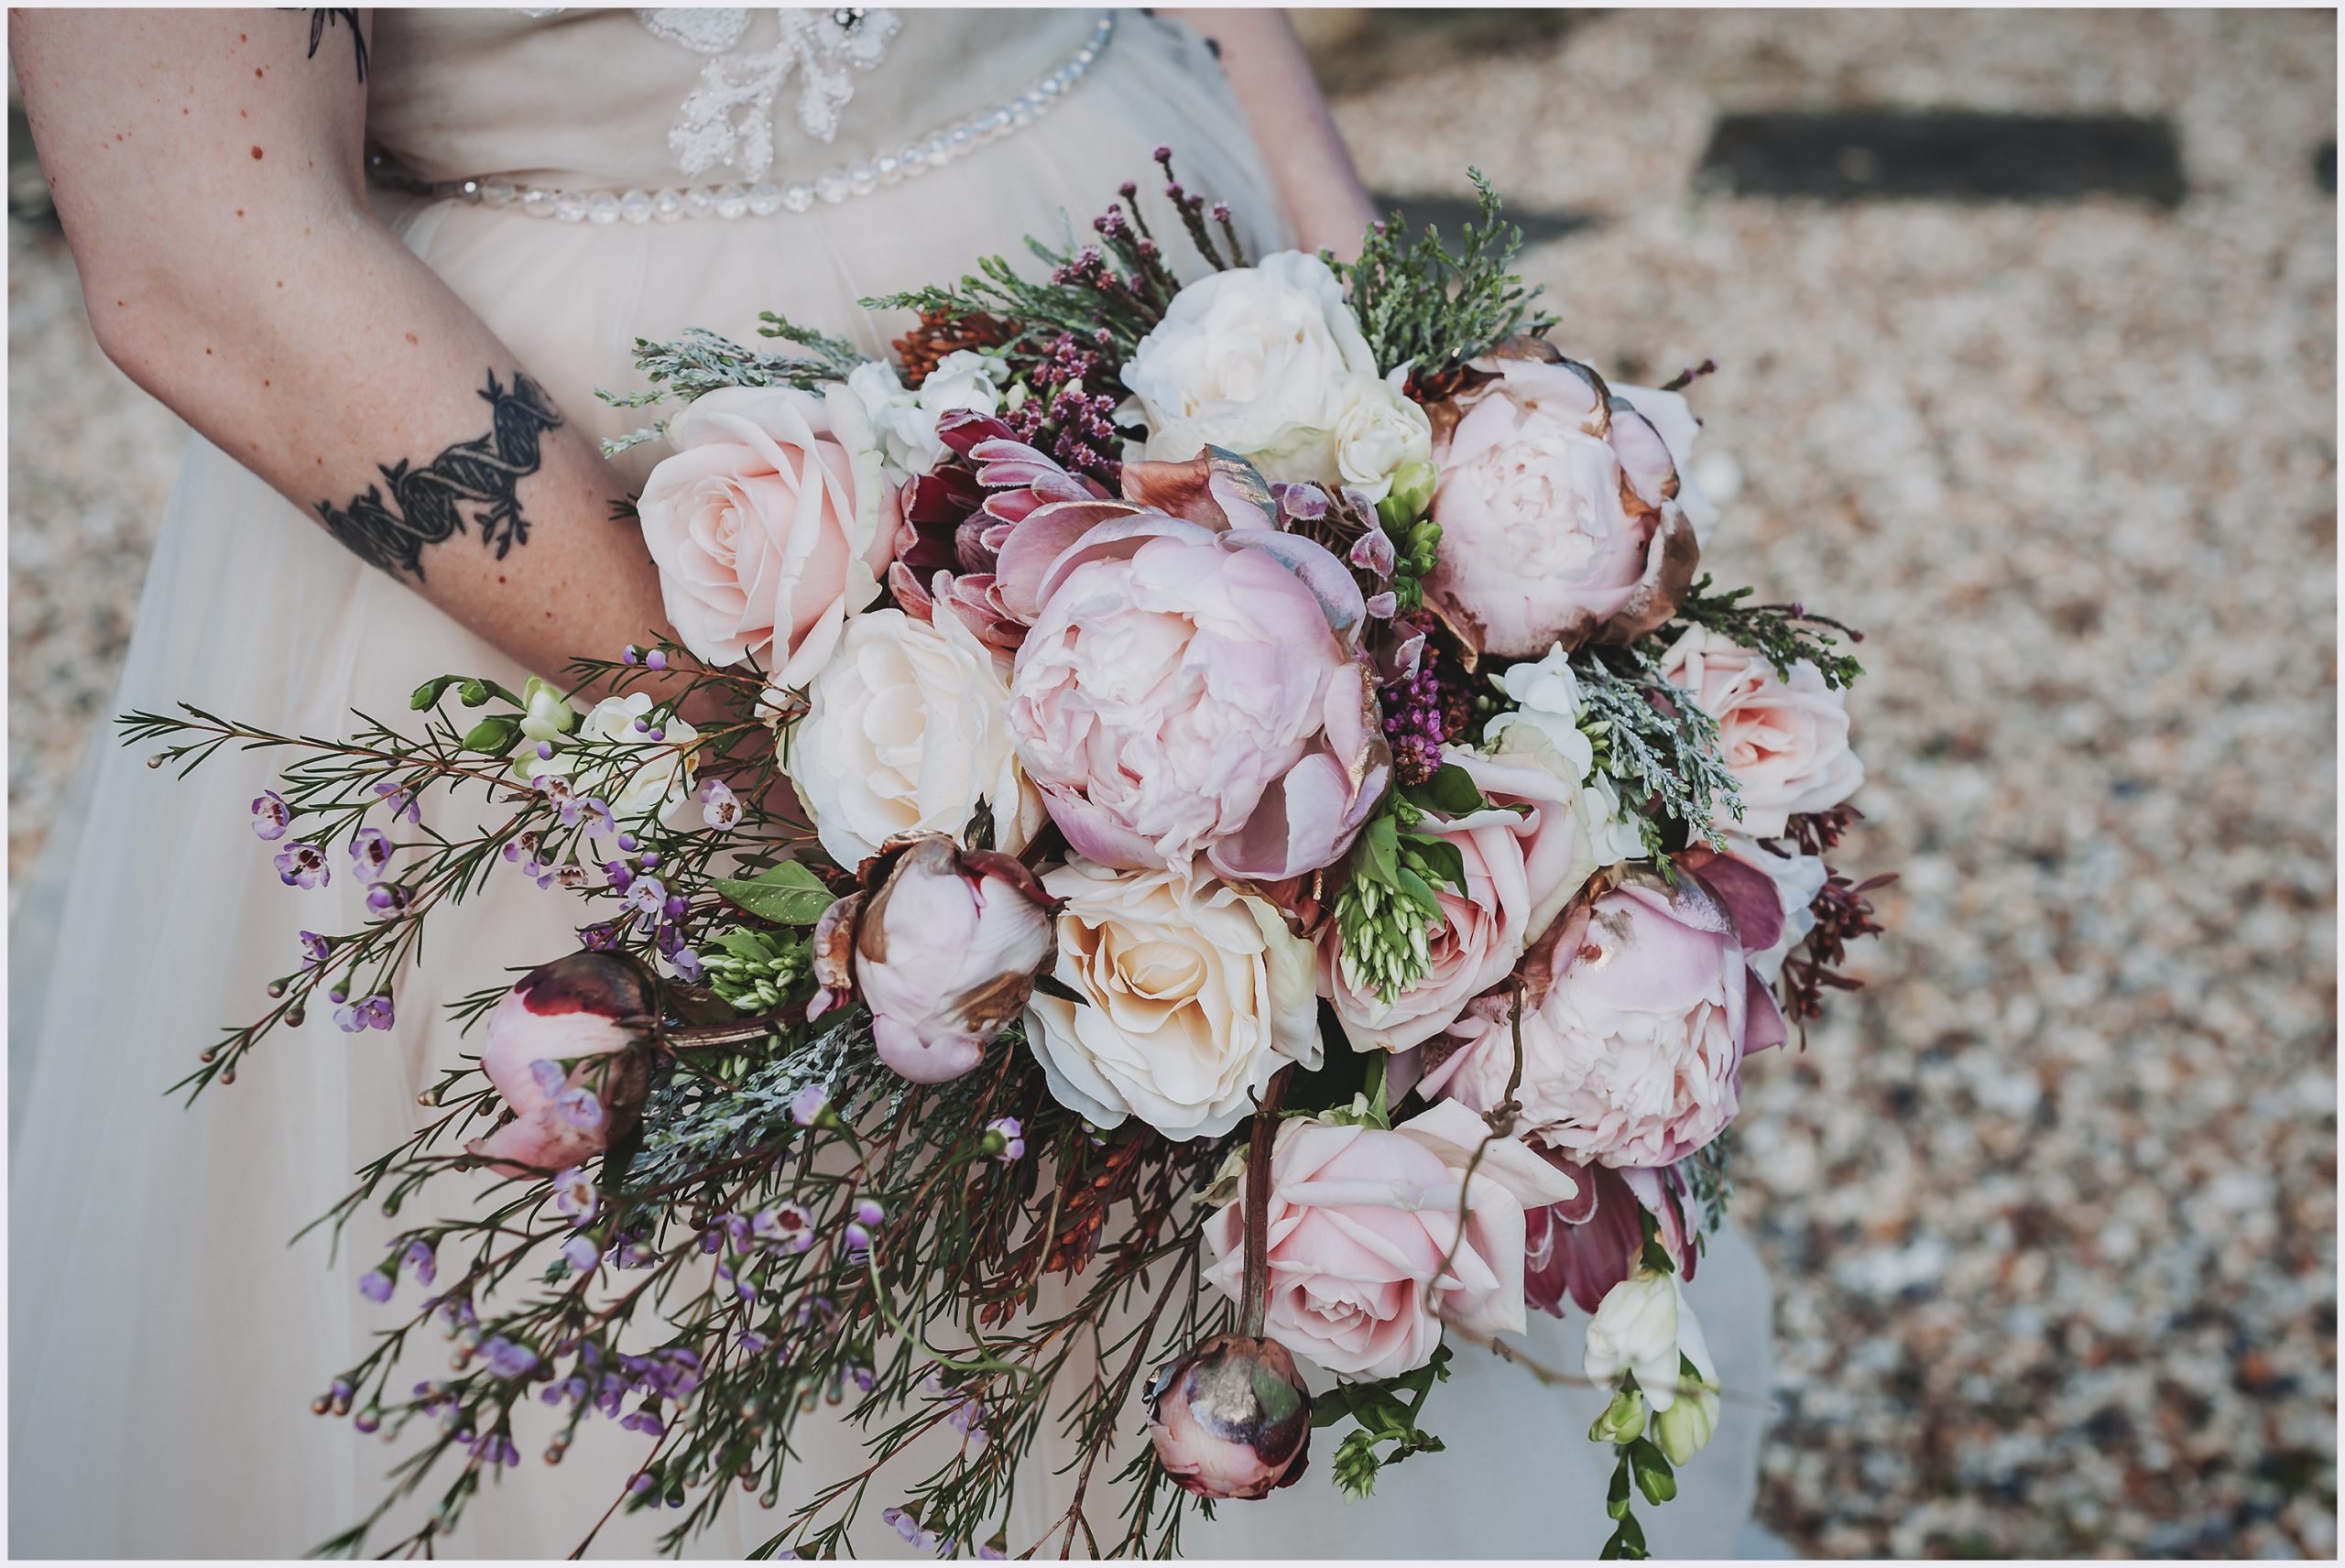 A stunning bouquet of flowers is held by a bride.  